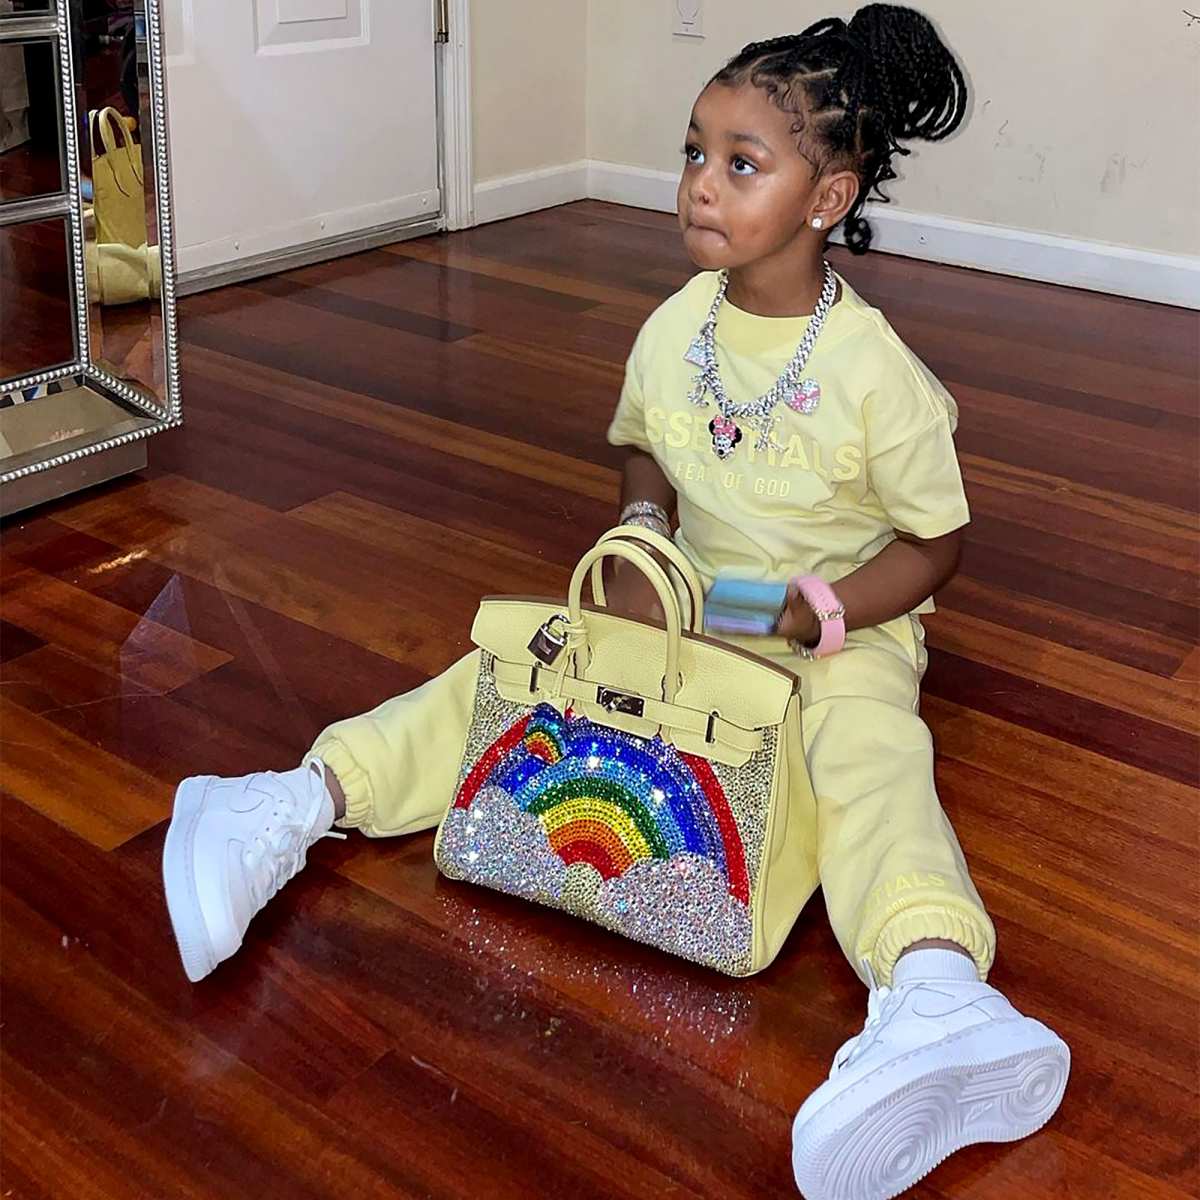 A Birkenstock Made of Hermes' Birkin Bags Is Selling for $48,000